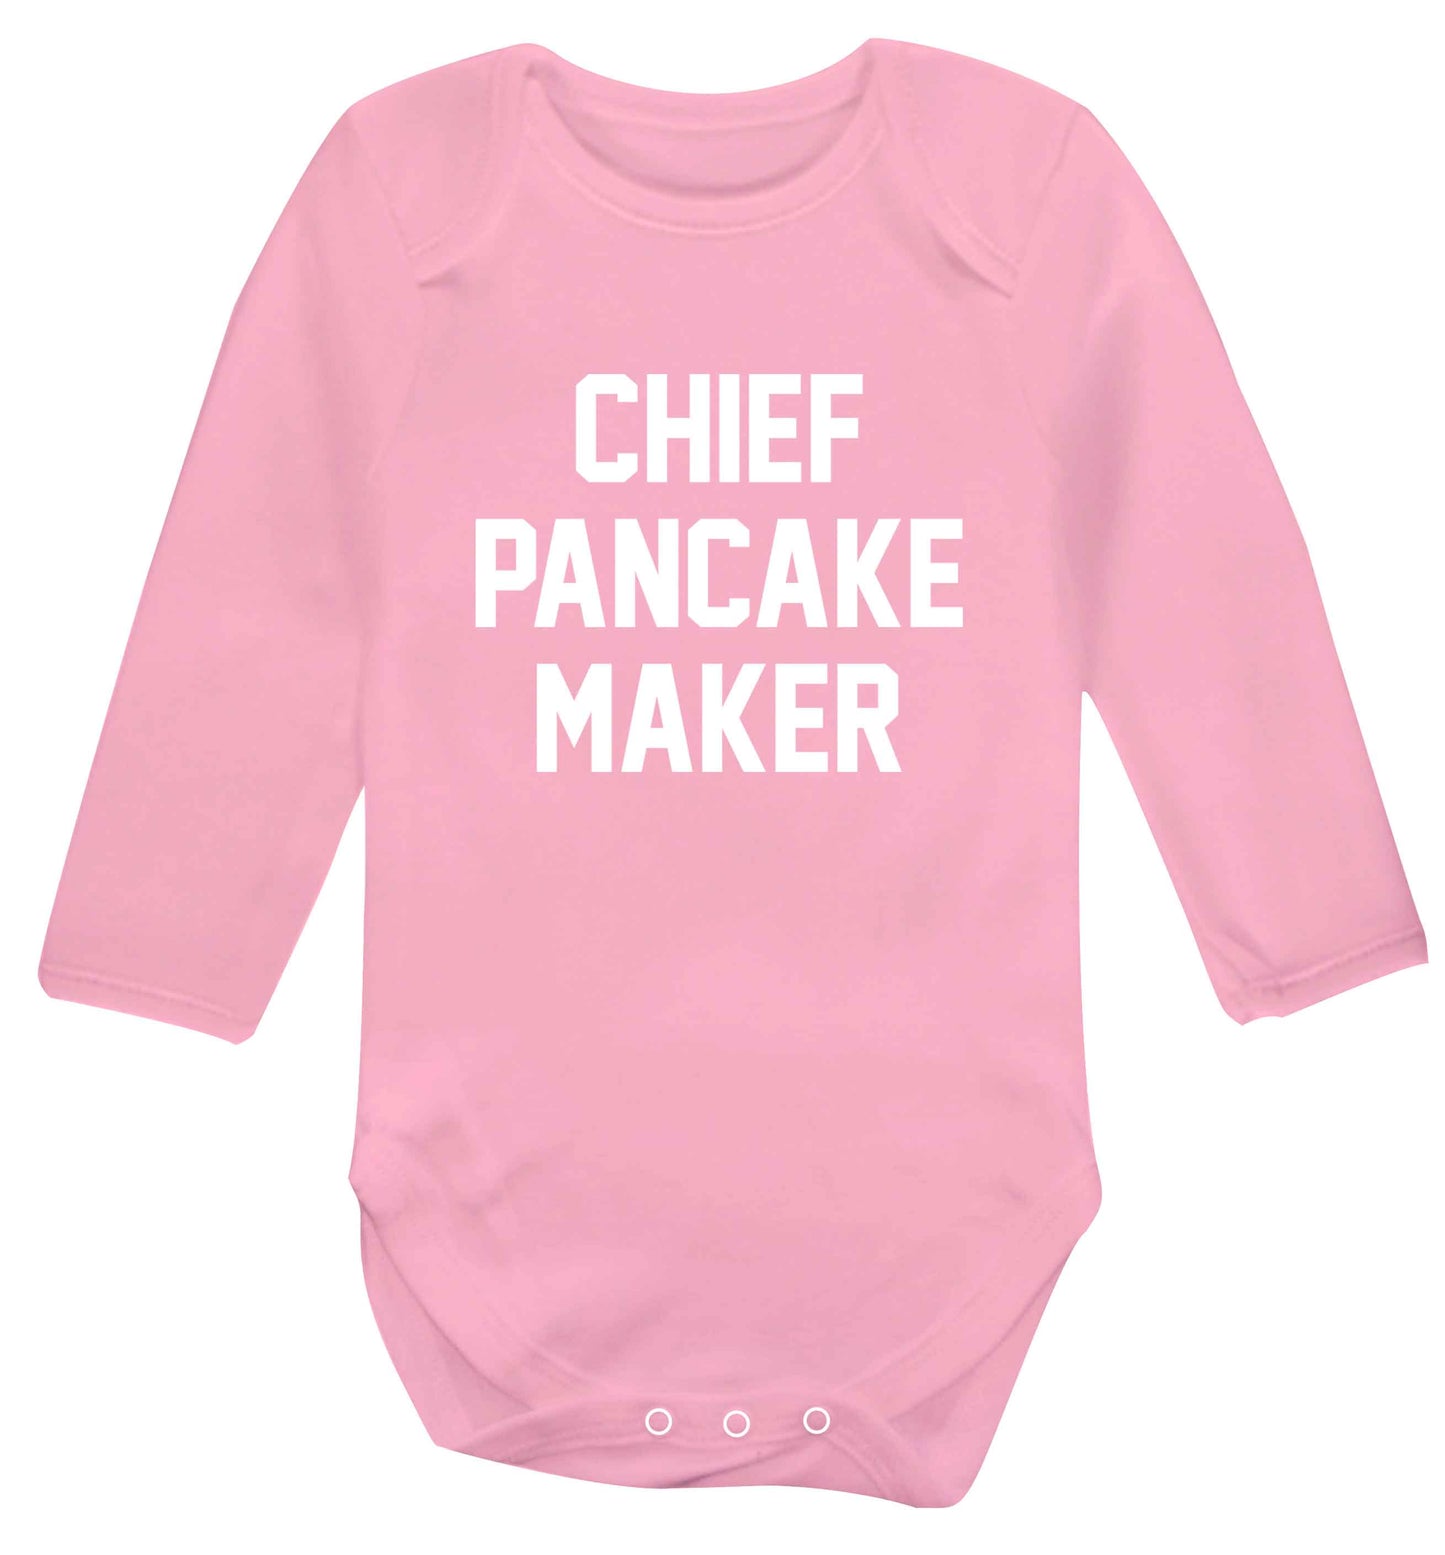 Chief pancake maker baby vest long sleeved pale pink 6-12 months